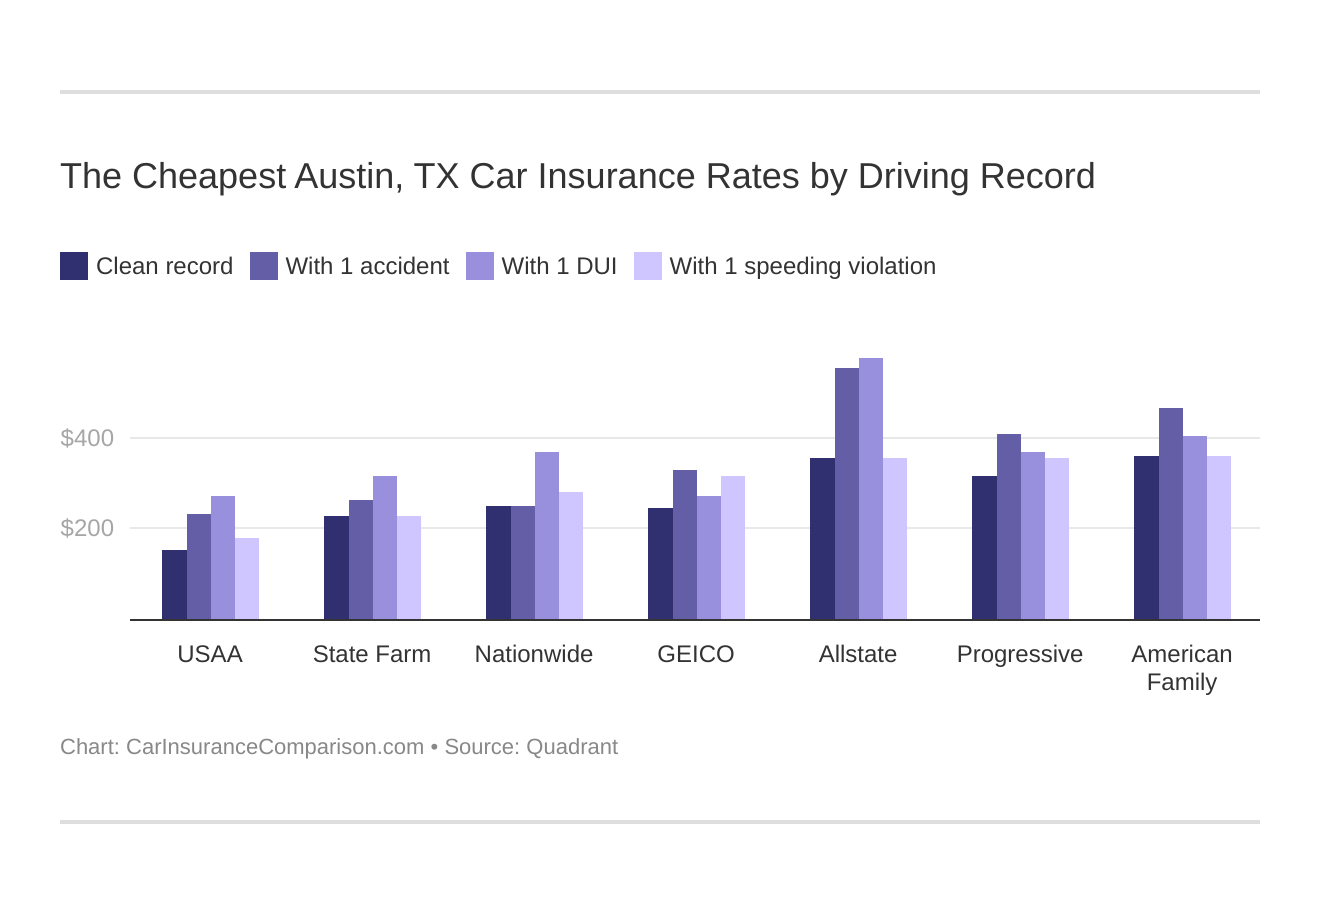 The Cheapest Austin, TX Car Insurance Rates by Driving Record